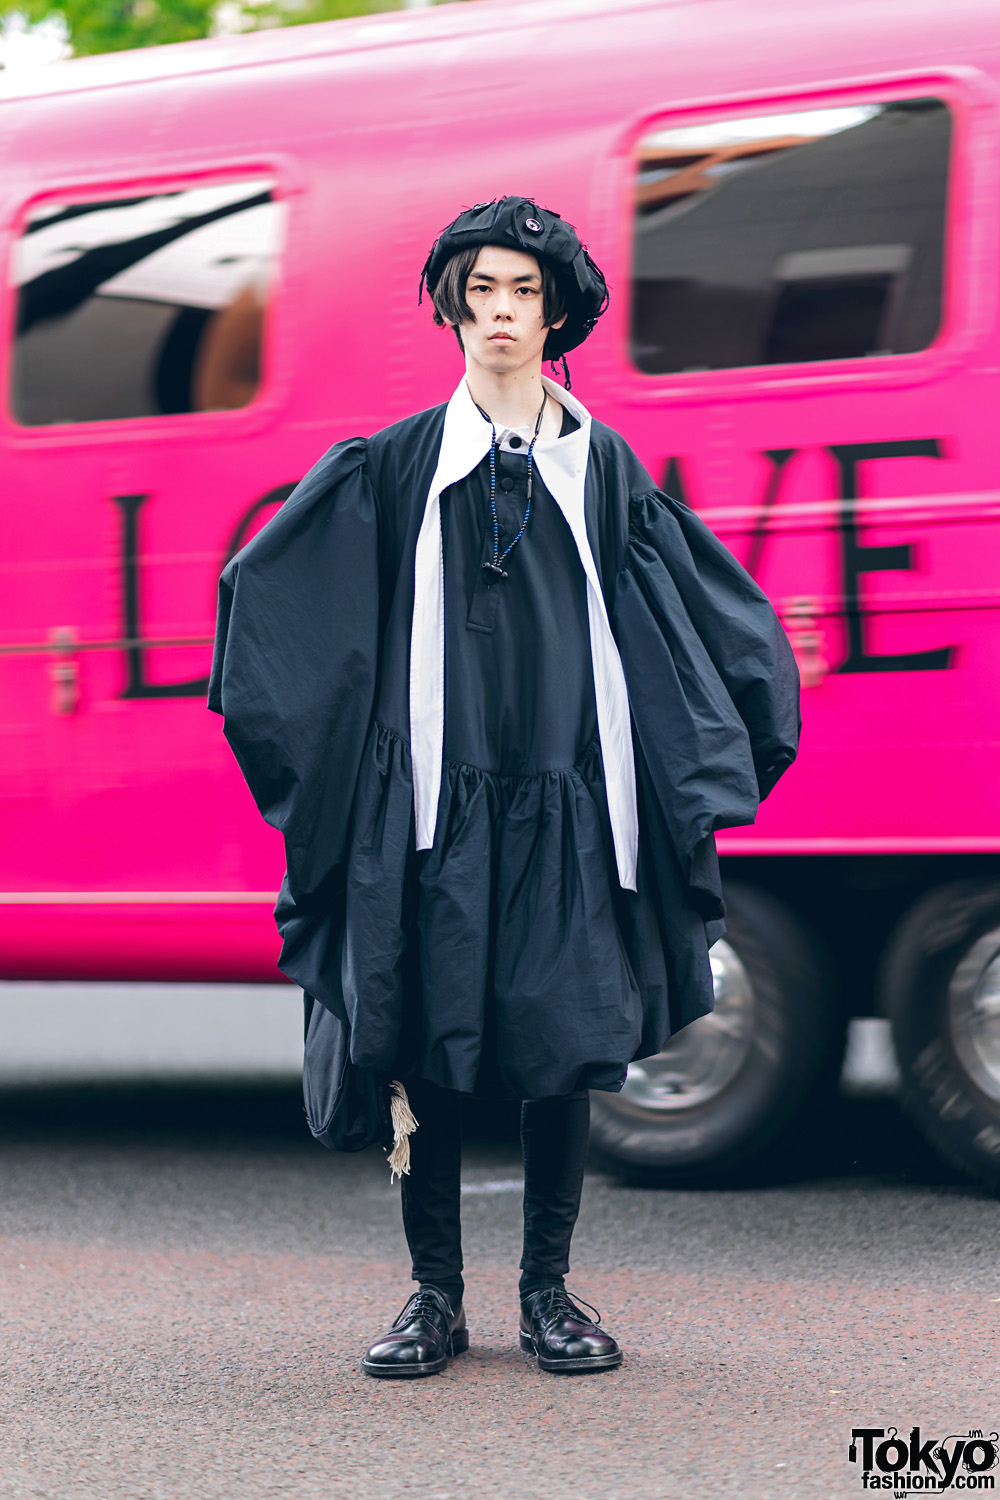 All Black Harajuku Street Style w/ Beret, Vaquera Deconstructed Puffy Robe, Christopher Nemeth Tassel Bag & Lace-Up Shoes